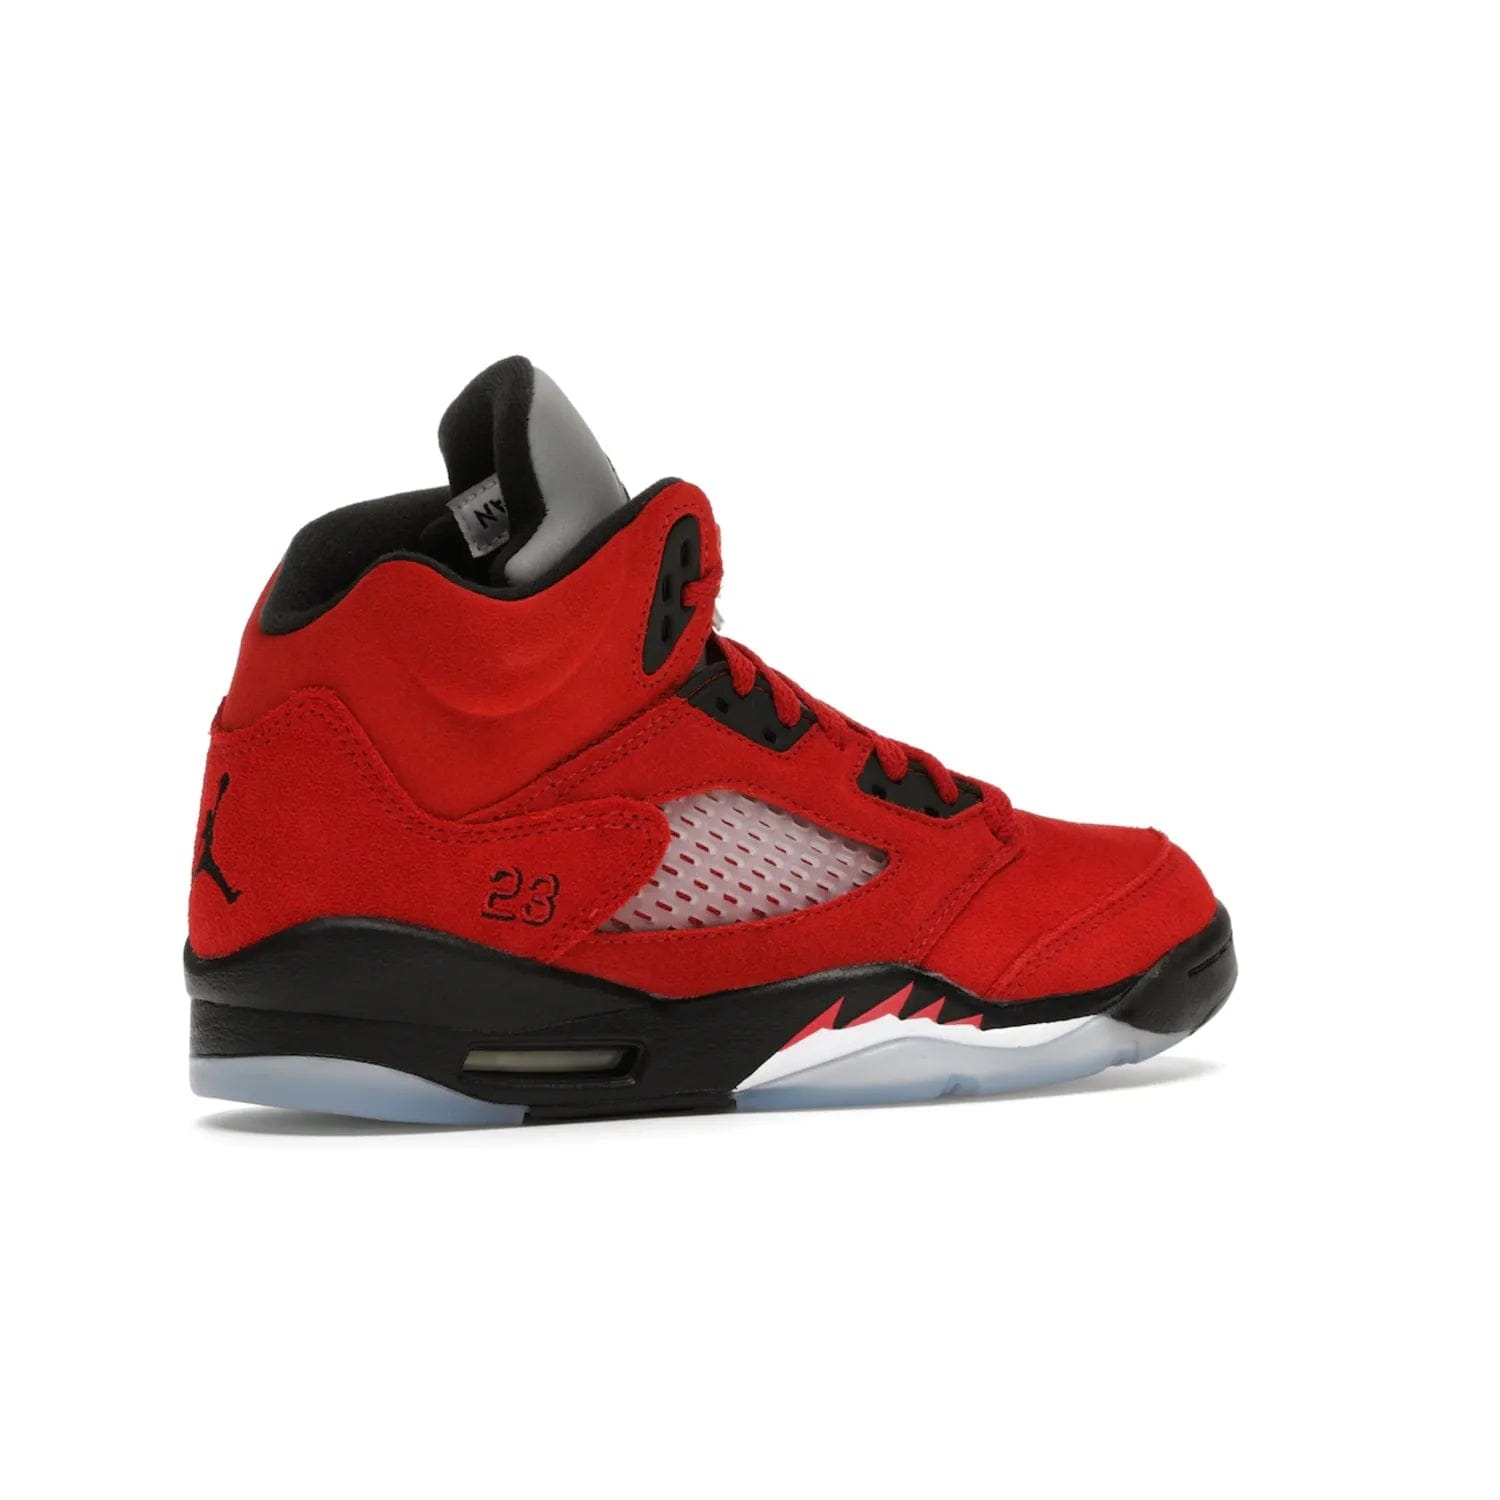 Jordan 5 Retro Raging Bull Red (2021) (GS) - Image 34 - Only at www.BallersClubKickz.com - Jordan 5 Retro Raging Bulls Red 2021 GS. Varsity Red suede upper with embroidered number 23, black leather detail, red laces, and midsole with air cushioning. Jumpman logos on tongue, heel, and outsole. On-trend streetwear and basketball style. Released April 10, 2021.